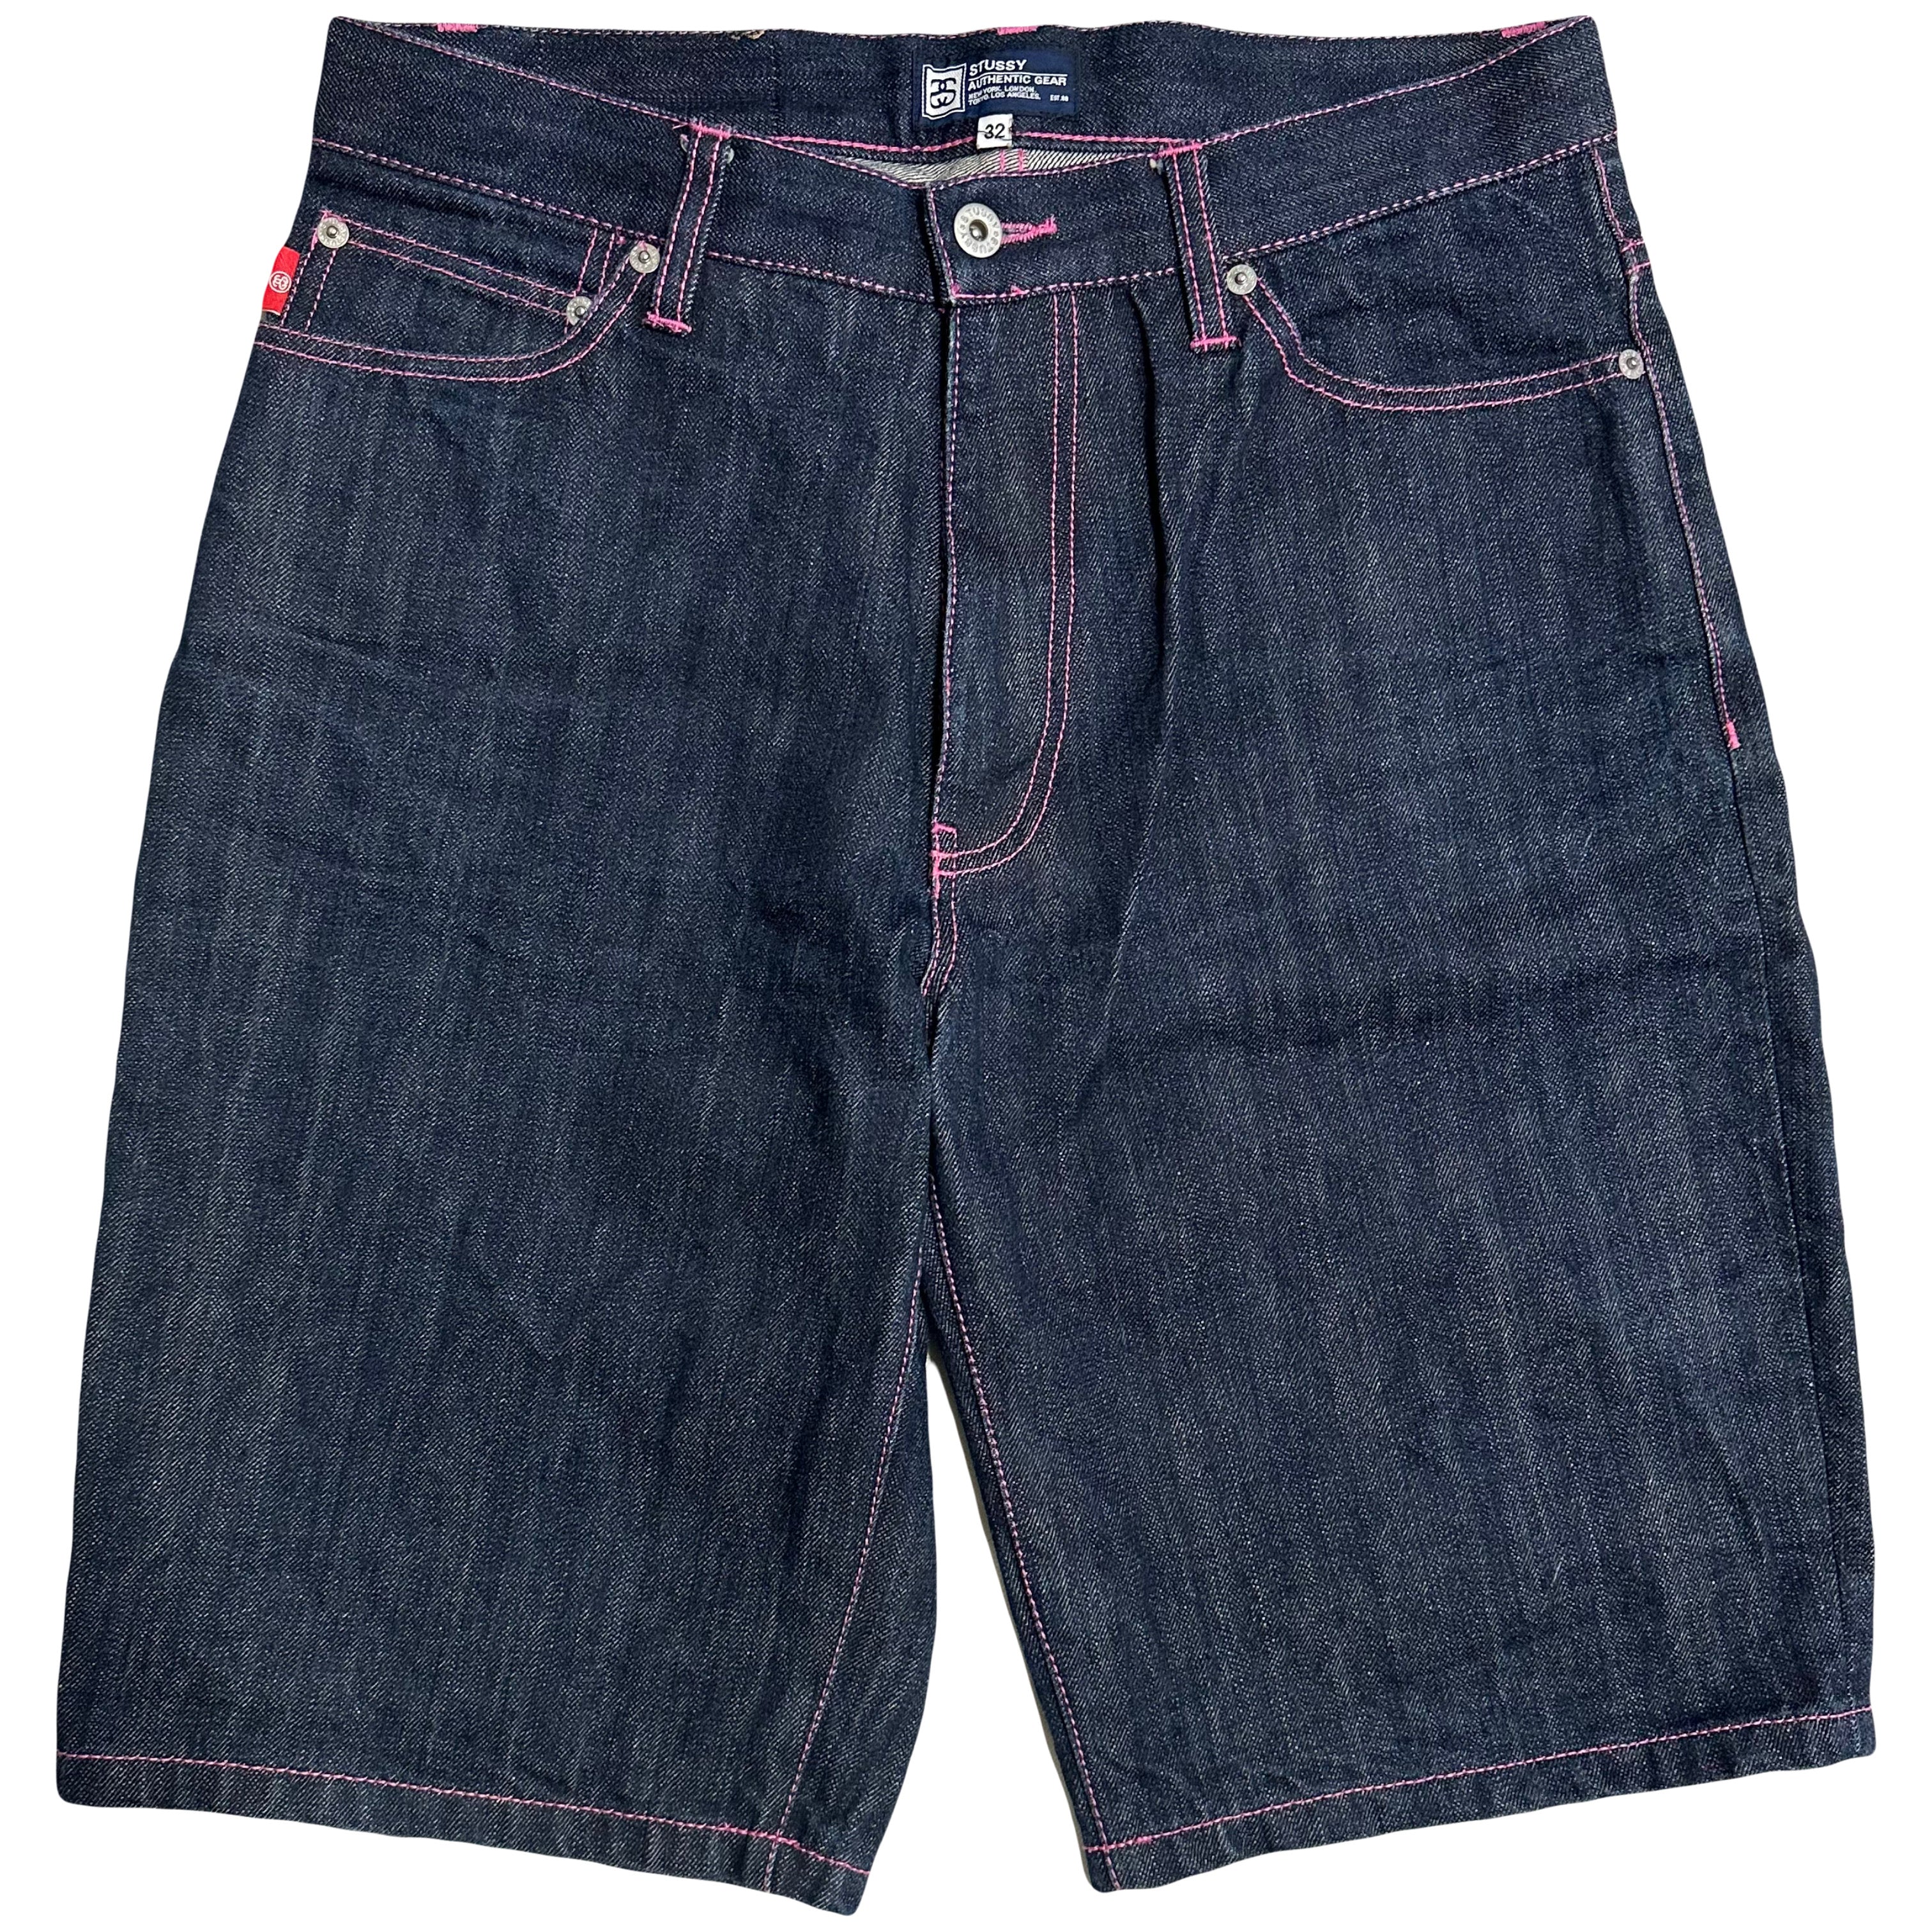 Stüssy Spellout Jorts With Pink Print ( W32 )